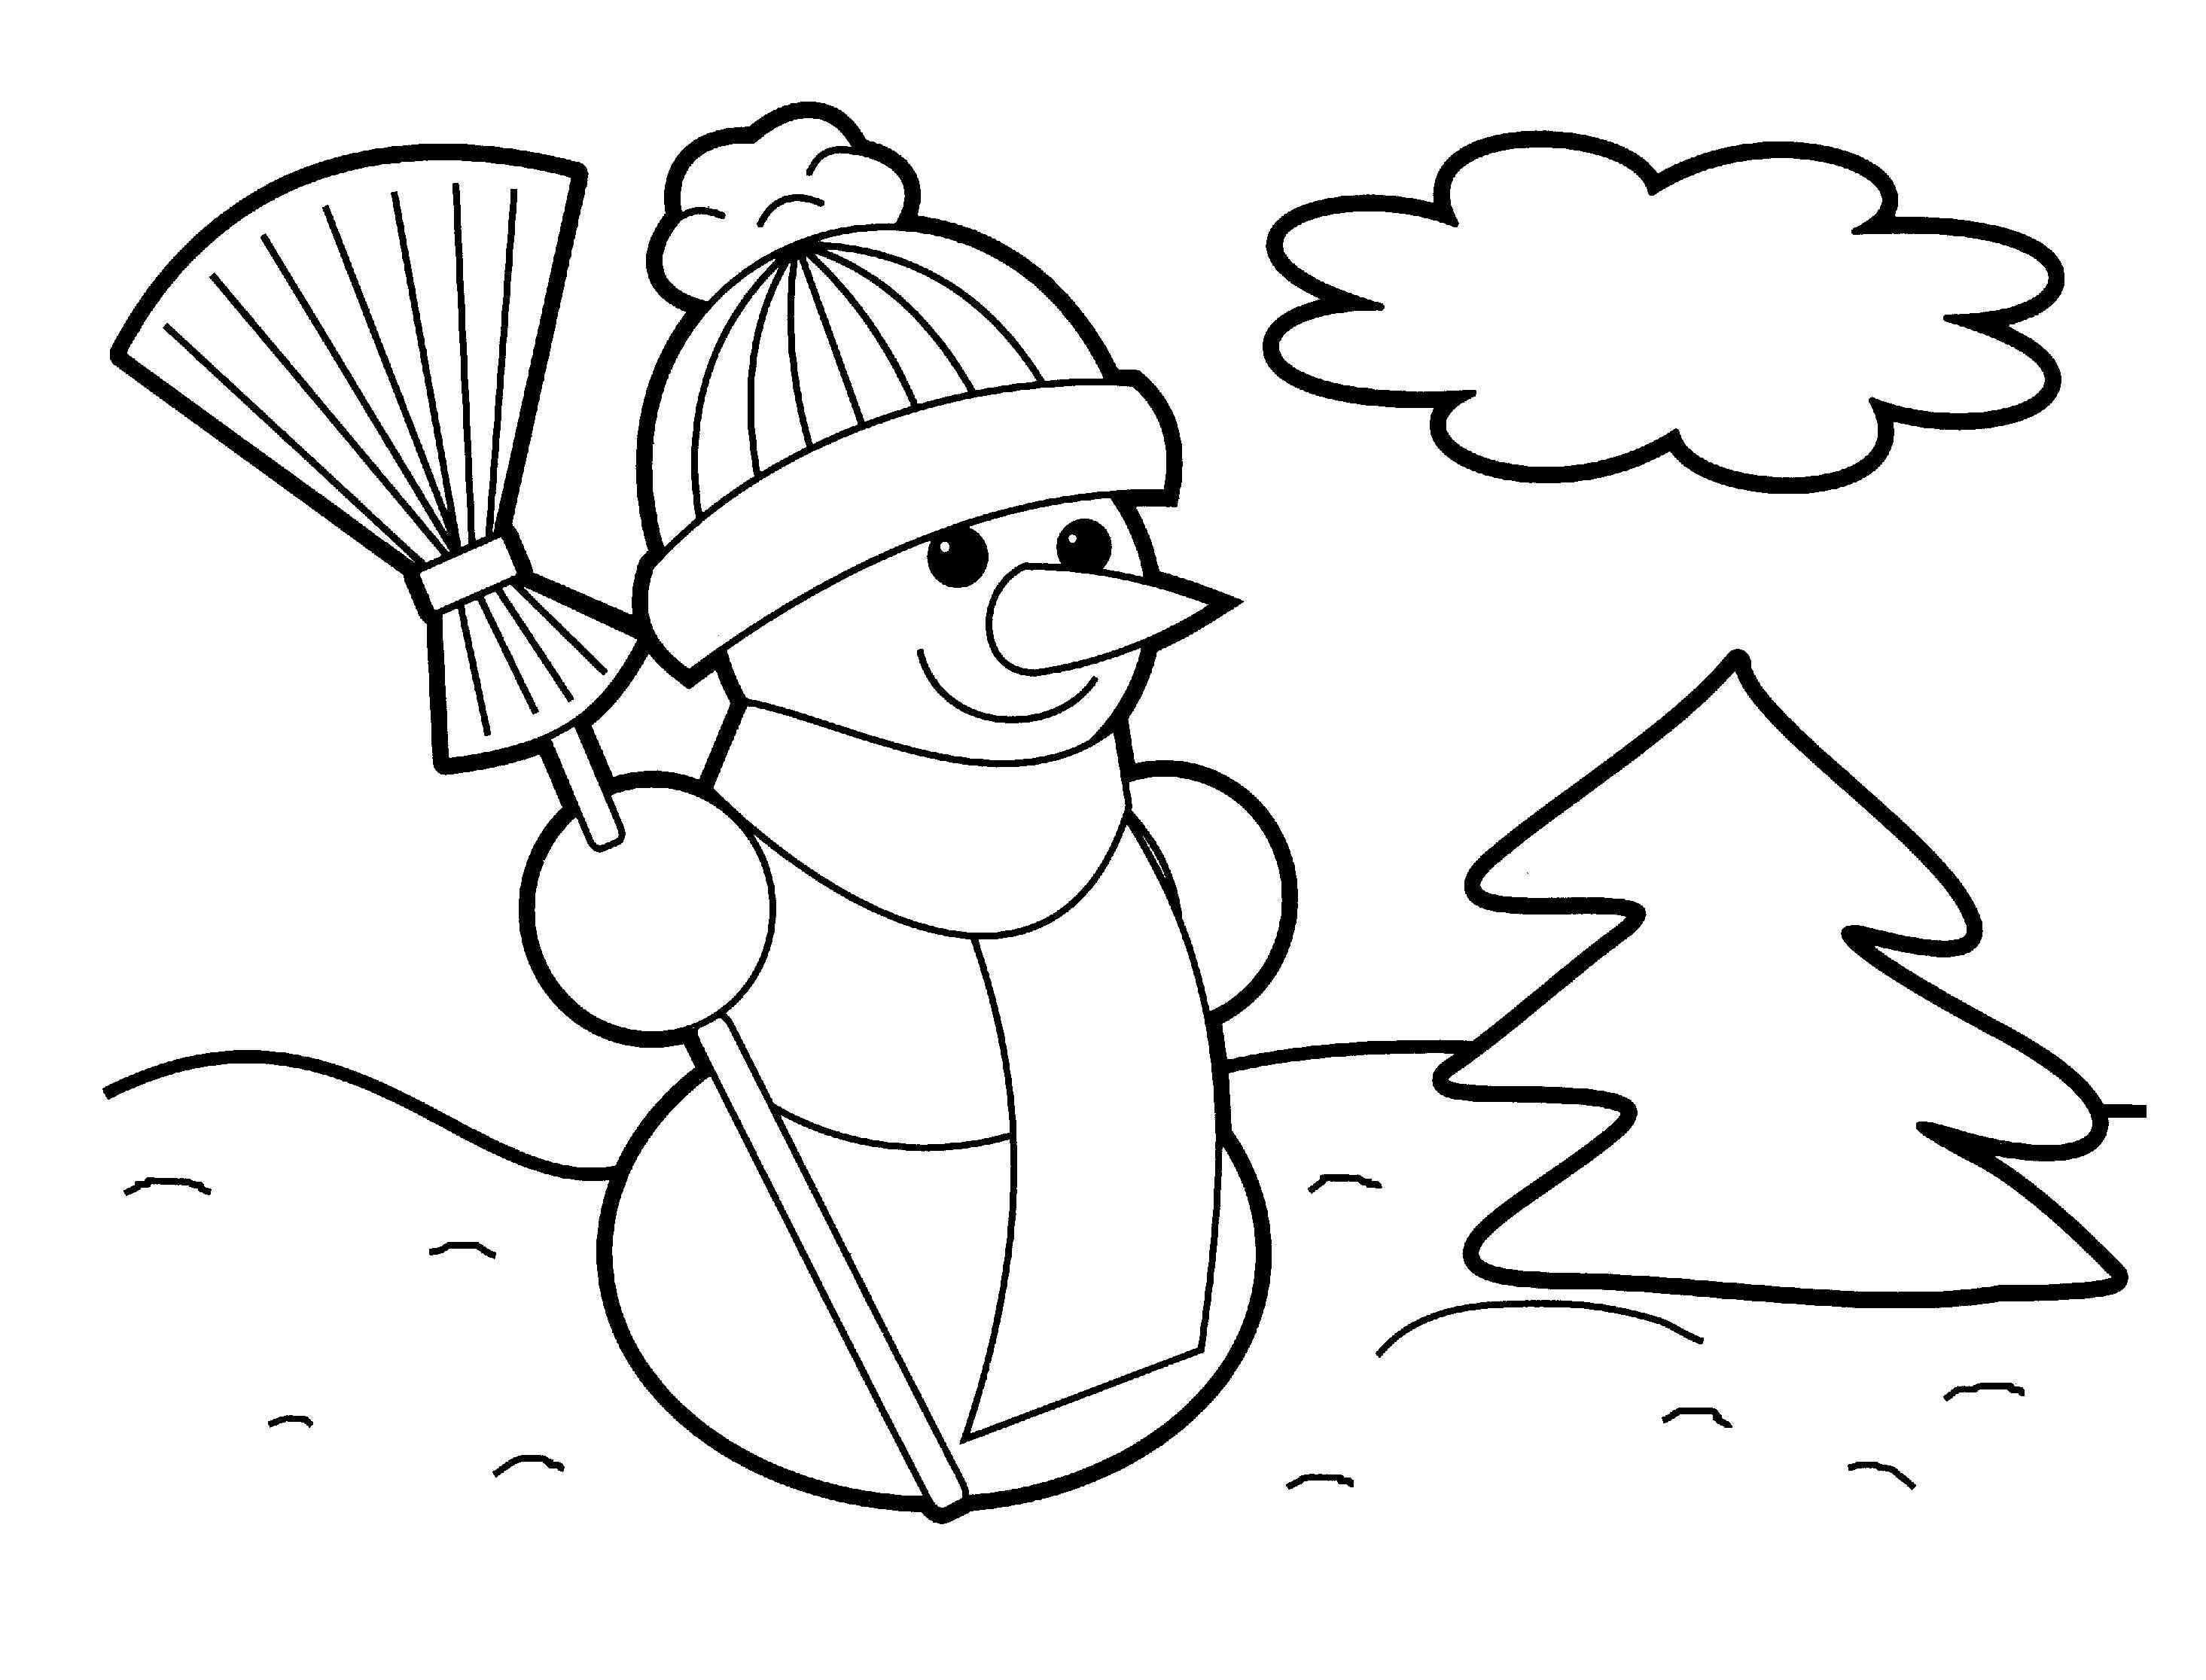 Coloring Worksheets for Preschool or Christmas Coloring Pages for Preschoolers Awesome Cool Coloring Page